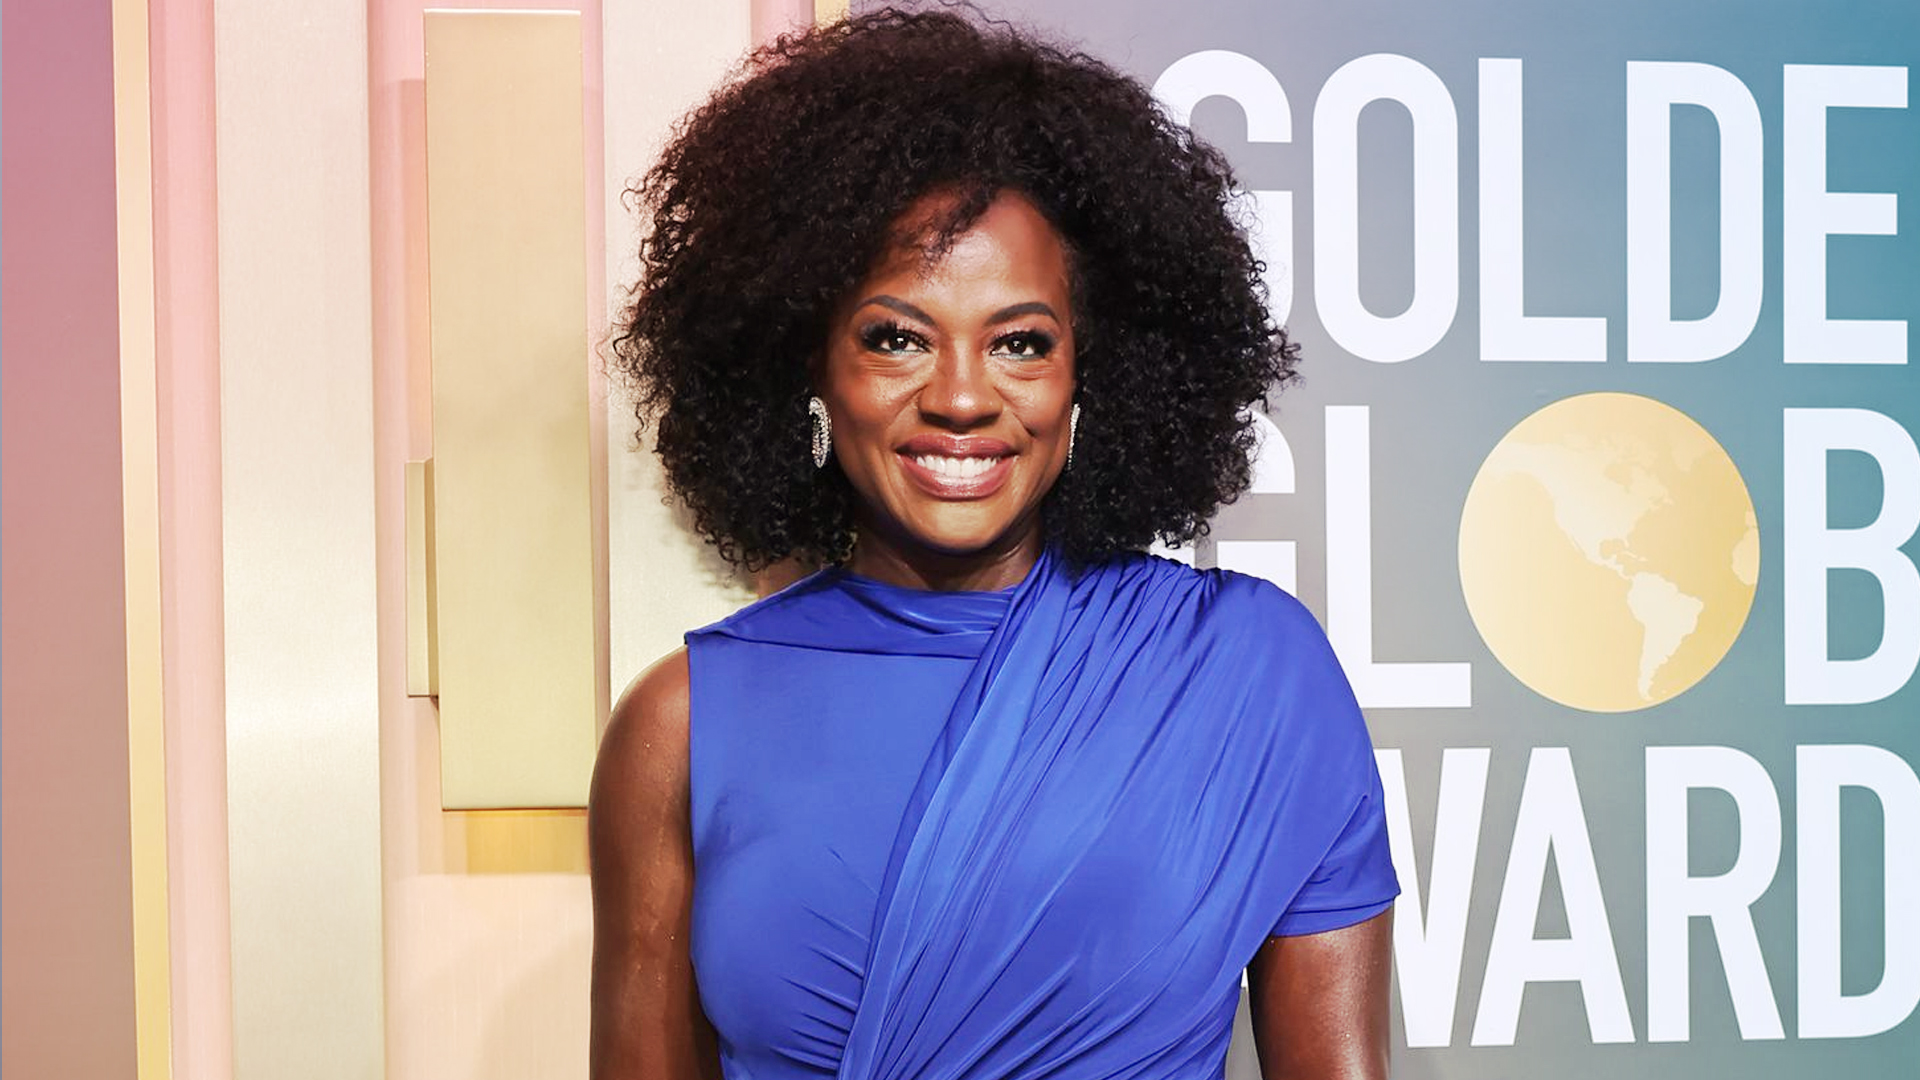 How Many Siblings Does Viola Davis Have?